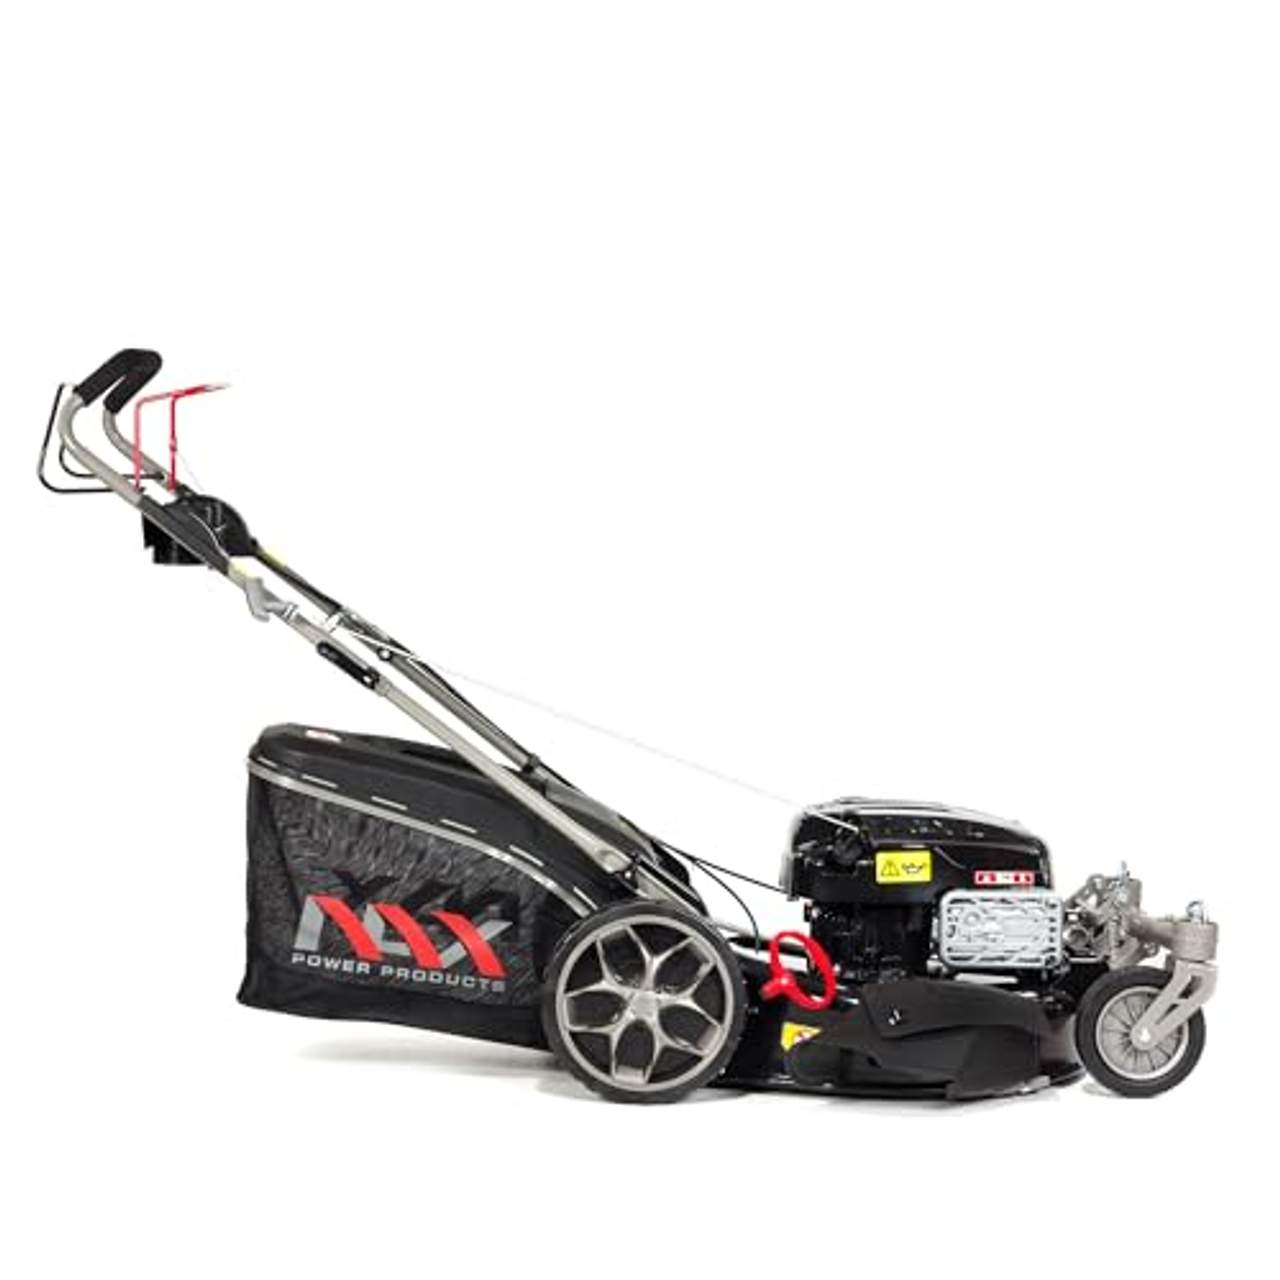 NAX Power Products Briggs & Stratton 5000S Motor 875Exi Serie